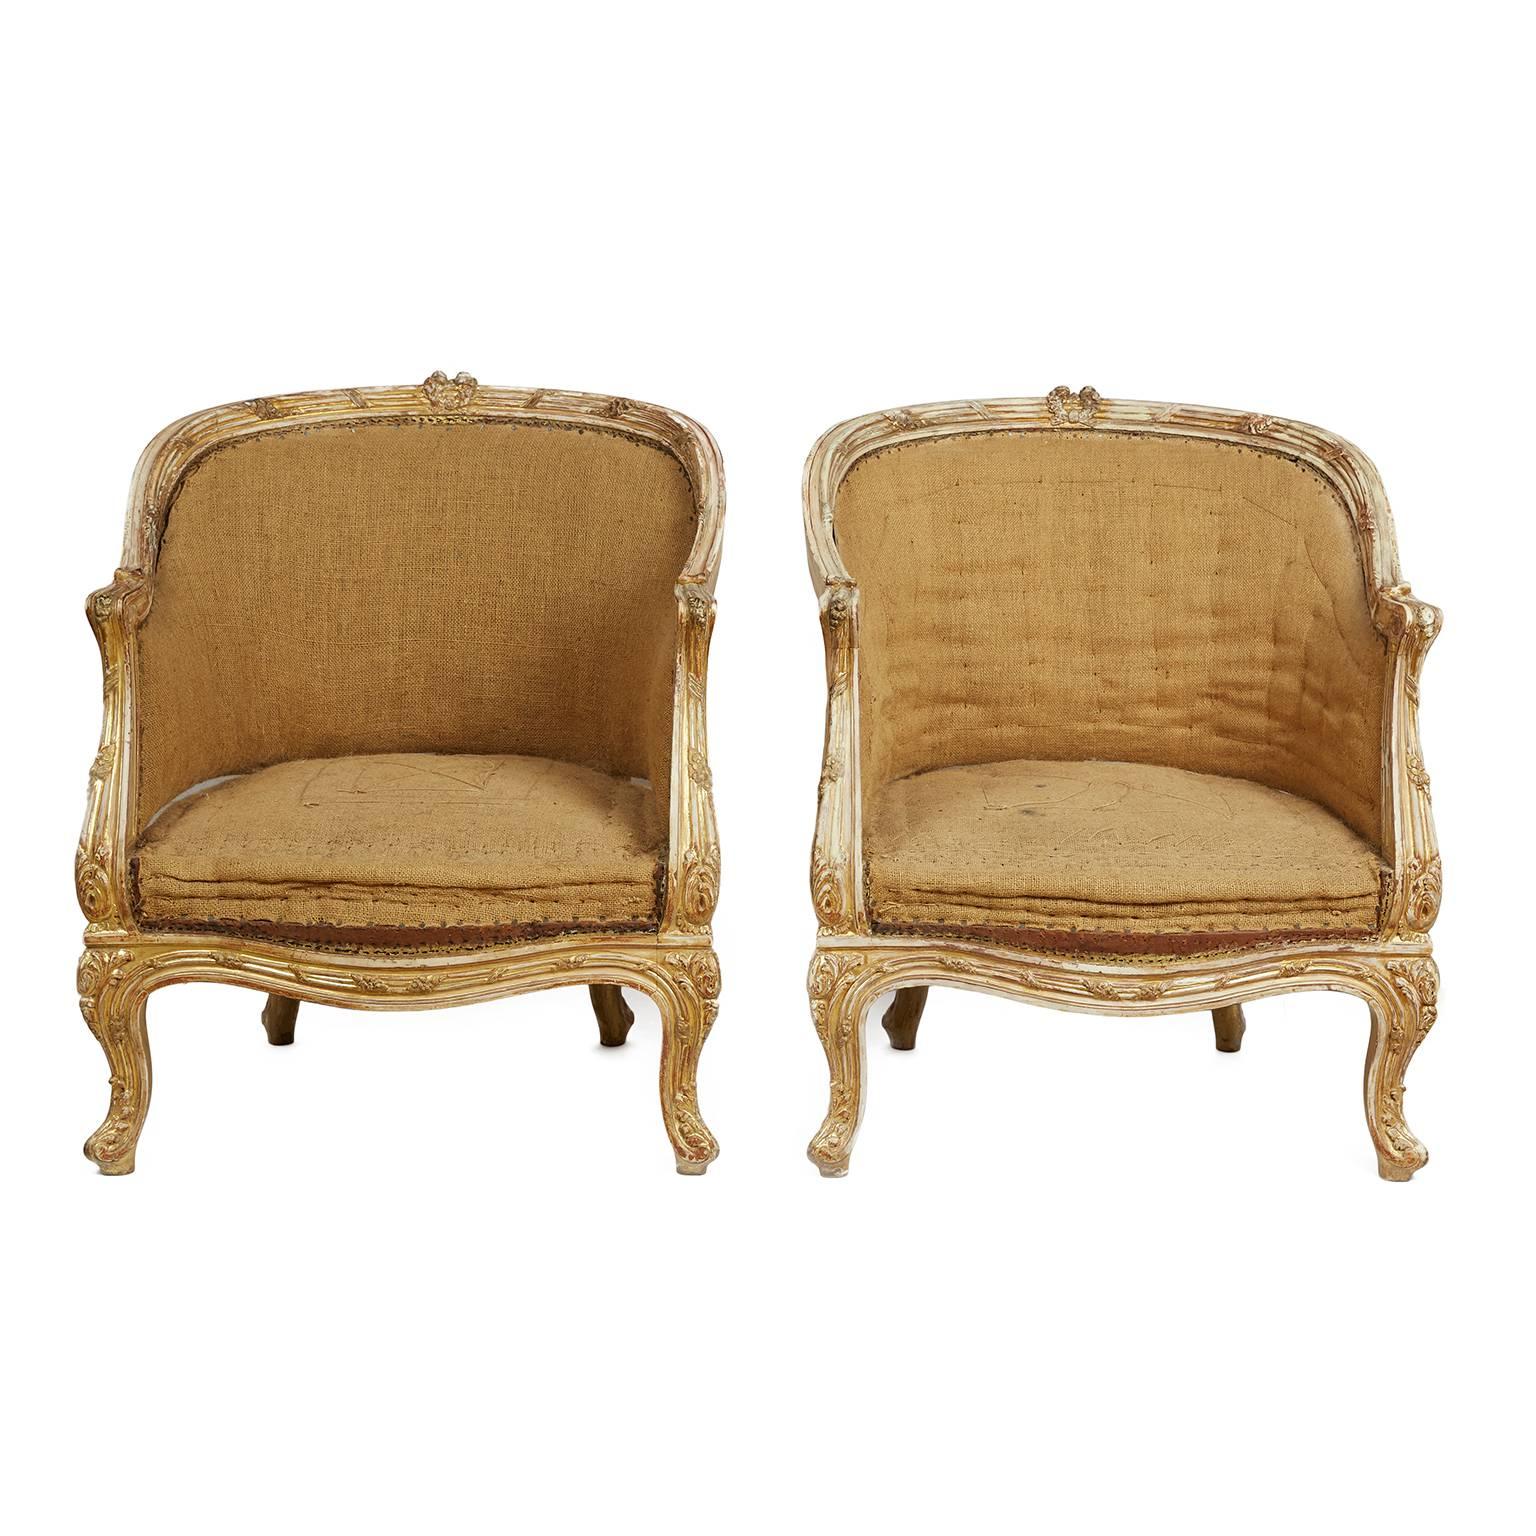 Fine pair of 19th century Bergeres chairs. Stripped down to the original undercover and ready for new upholstery. Wonderful period patina with elegant remnants of paint and golf leaf. Carved details are delicate and sophisticated.